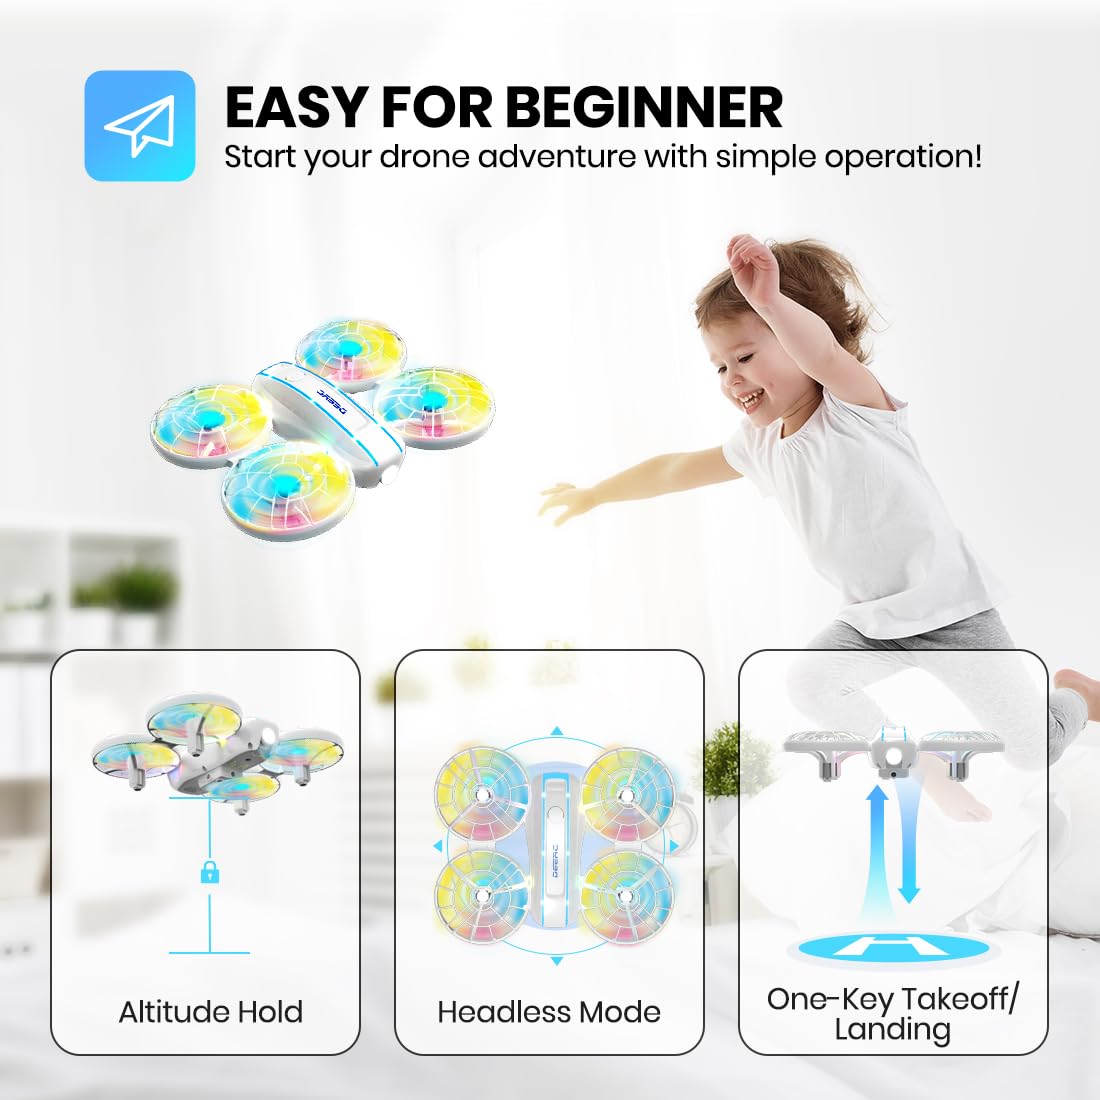 DEERC Mini Drone for Kids, D33 LED Remote Control Drone with 2 Batteries, Kids Drone with Auto Hovering, Headless Mode, 3D Flips and Throw to Go, Great Gift Toys for Boys Indoor Drone